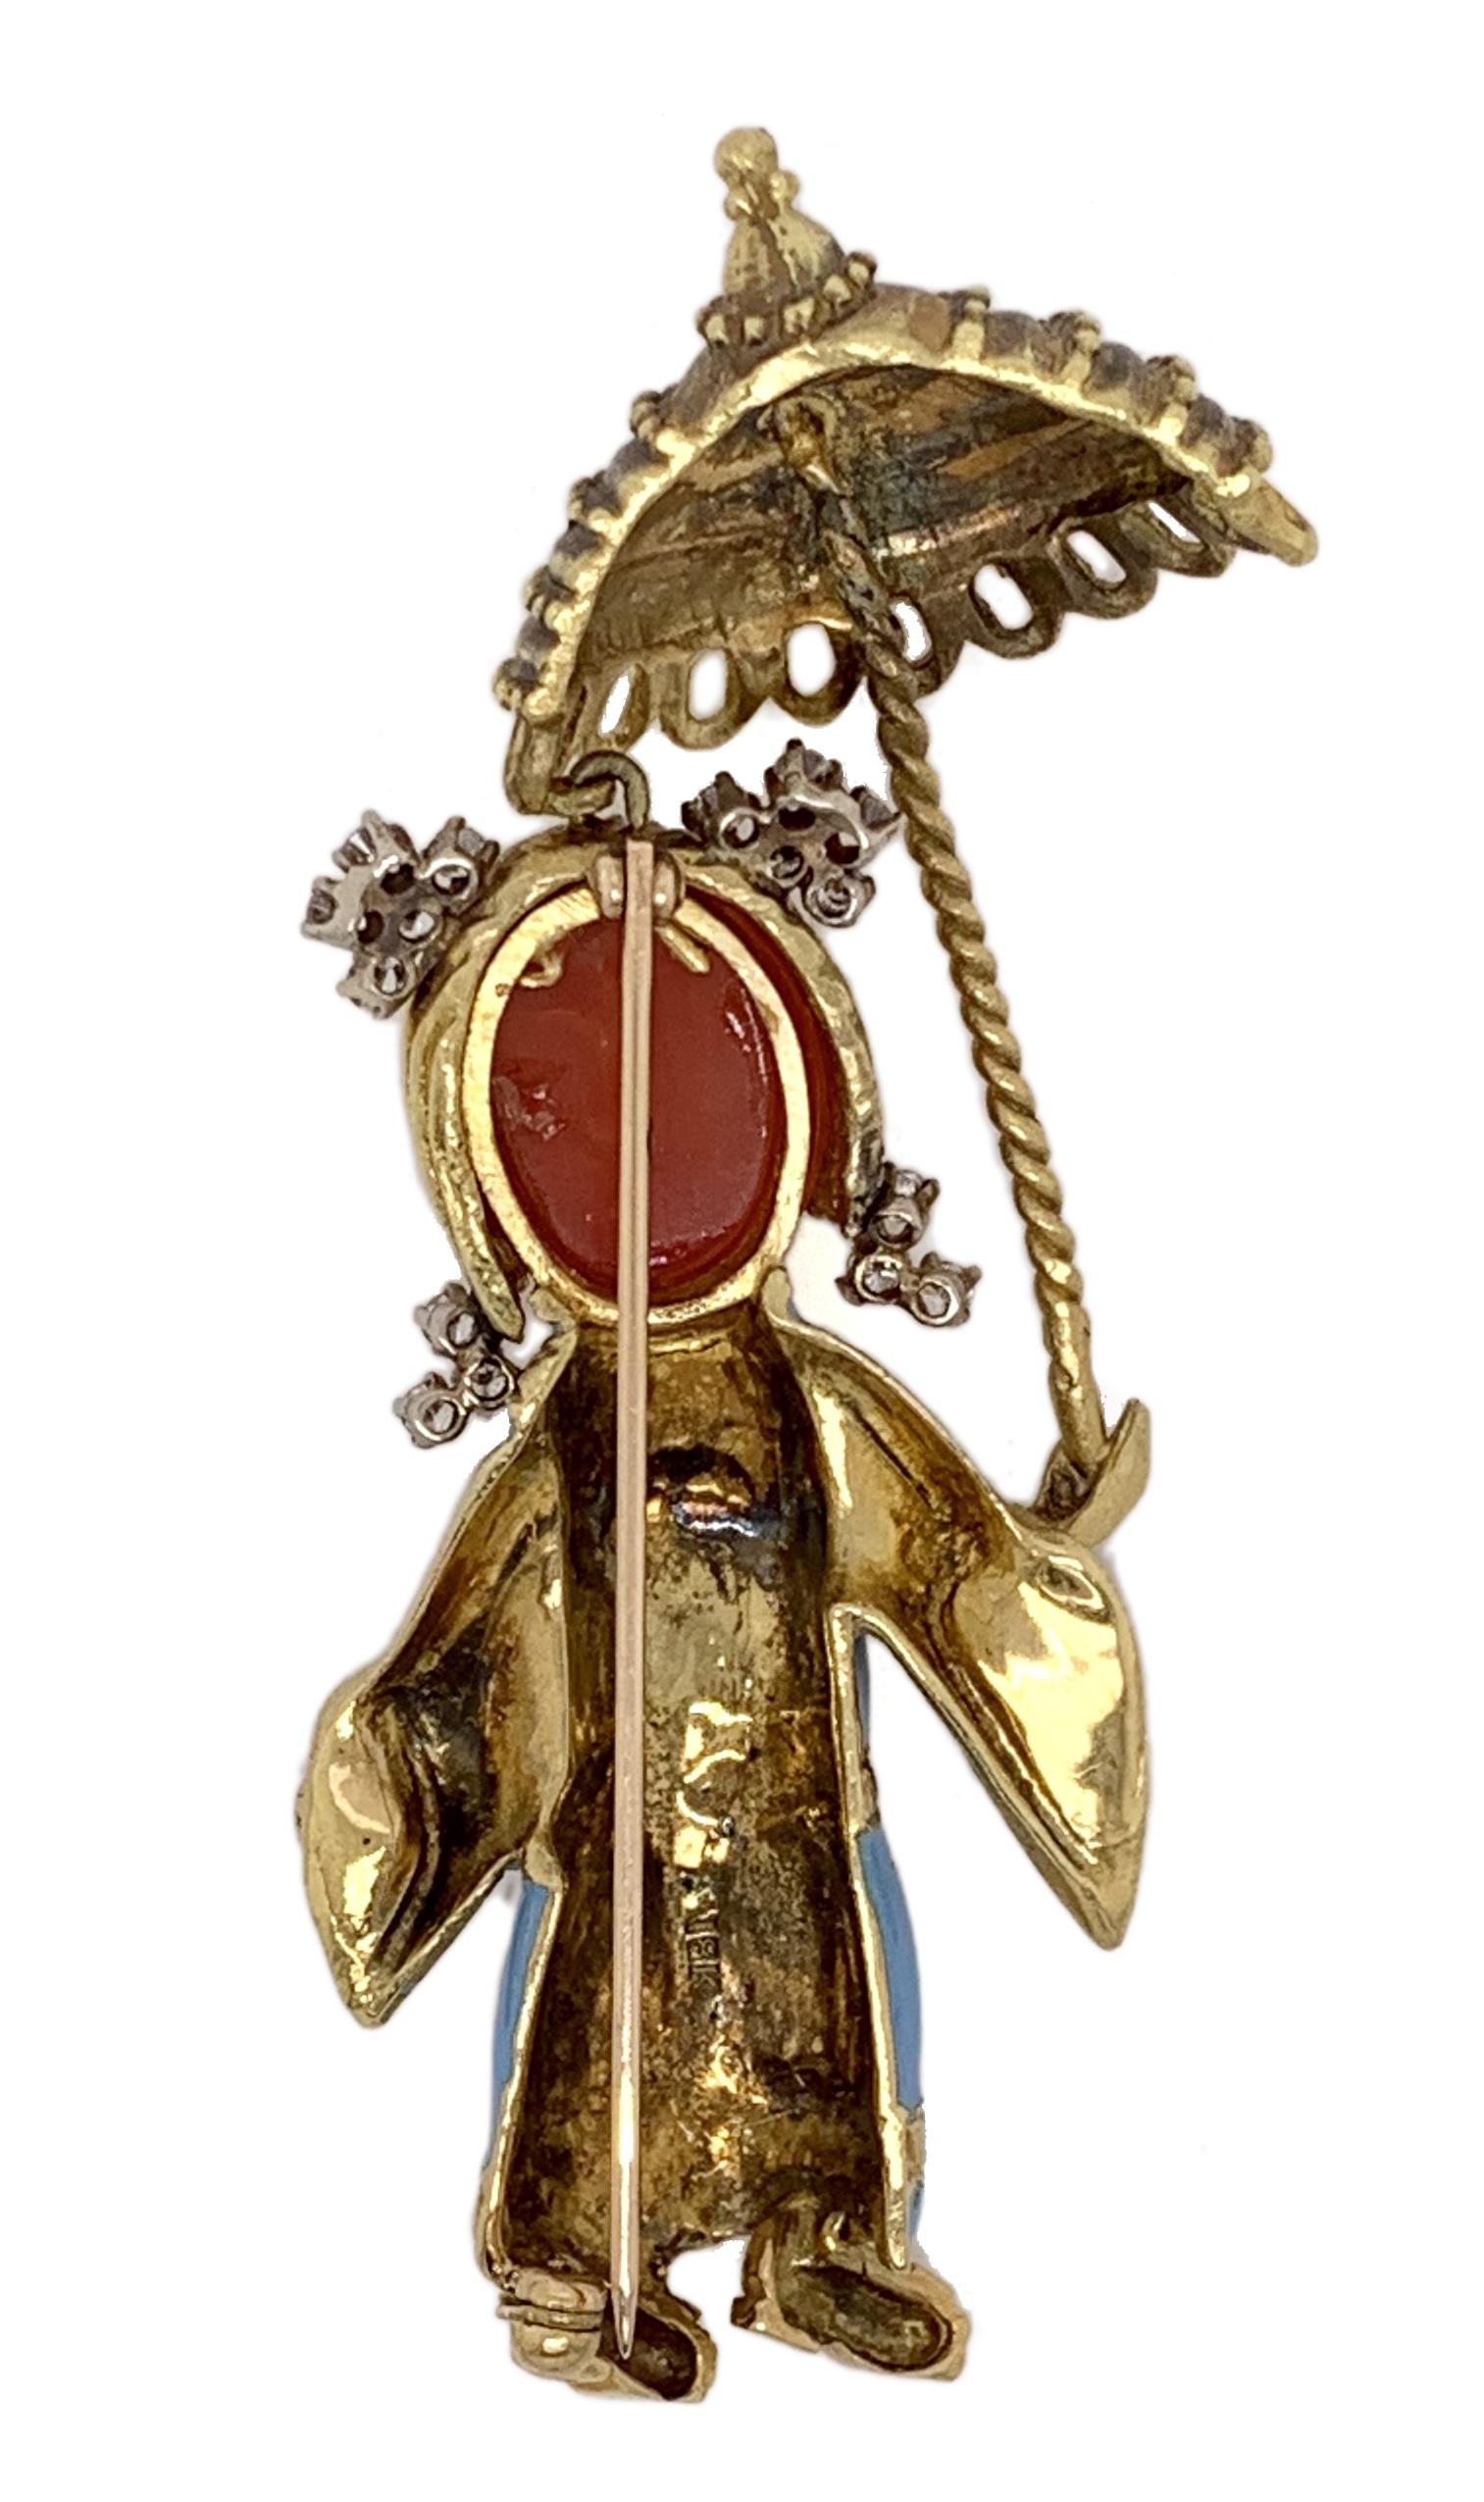 An American mid-20th Century 18 karat yellow gold brooch with enamel, diamonds and coral, attributed to Donald Claflin for Tiffany & Co. The brooch has a cabochon-cut coral face with black enamel eyes, turquoise enamel dress, and 16 round brilliant